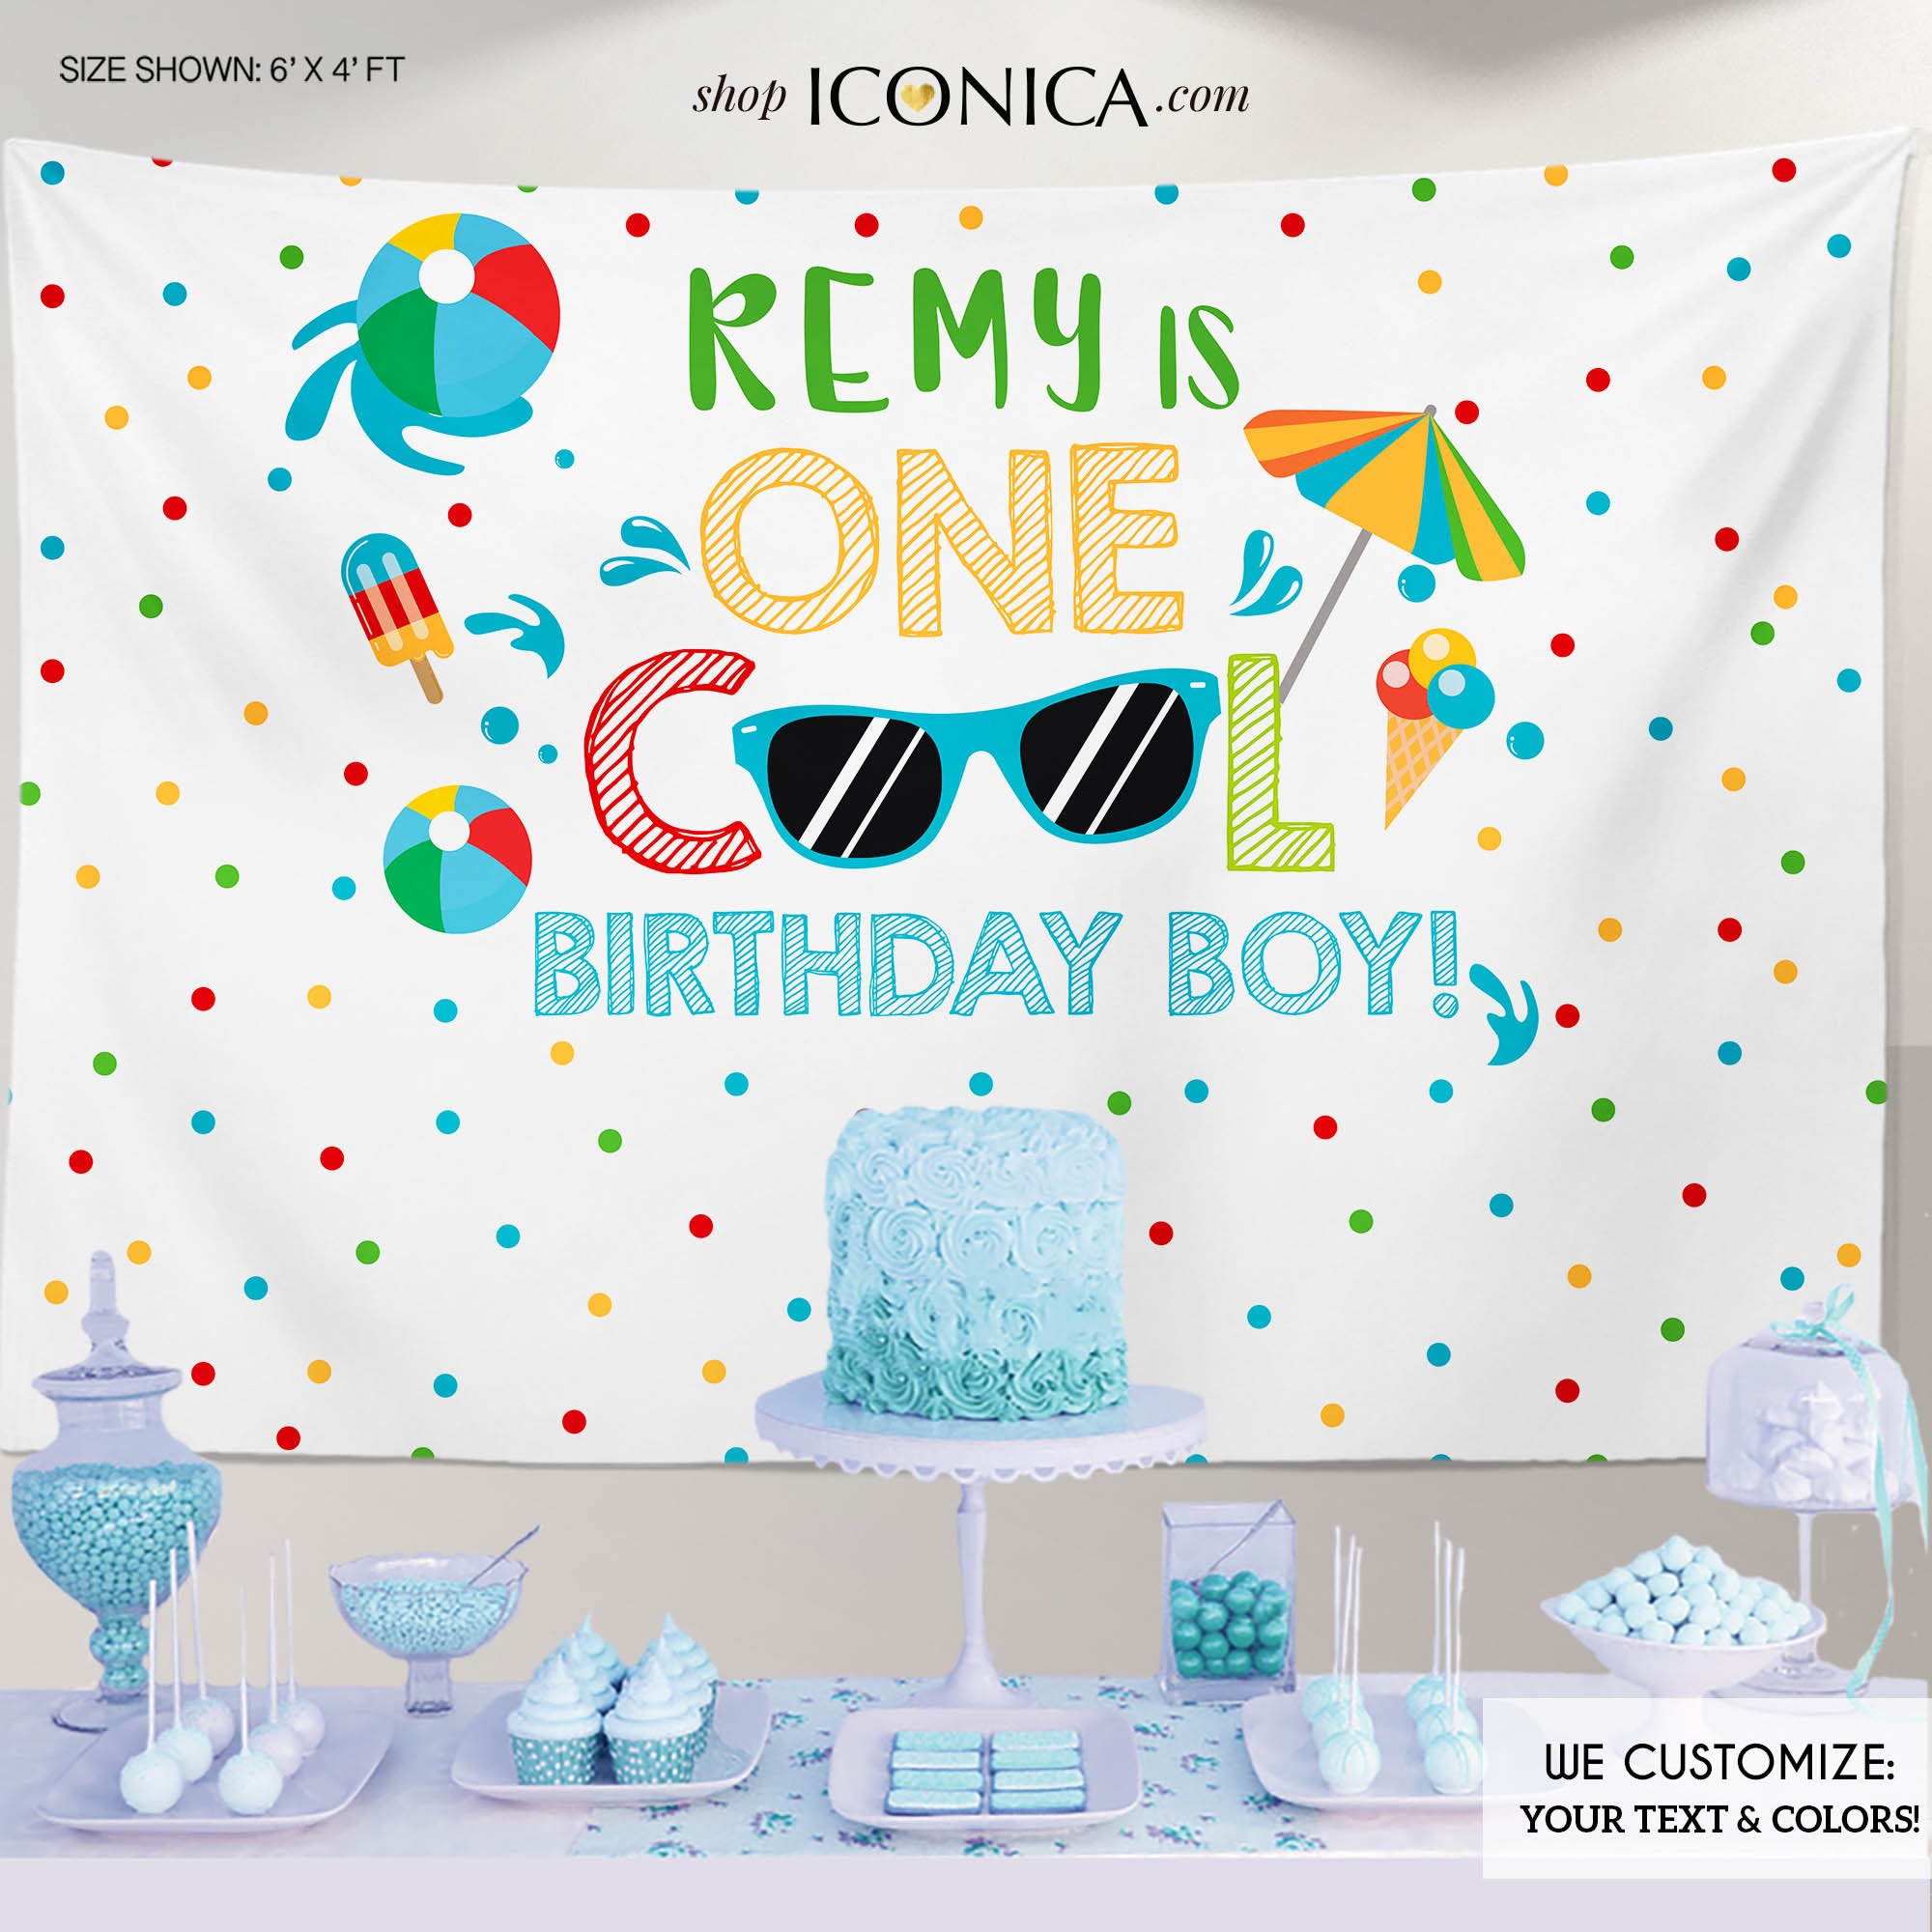 Pool party backdrop,Pool party decorations,ONE COOL Birthday Boy ...